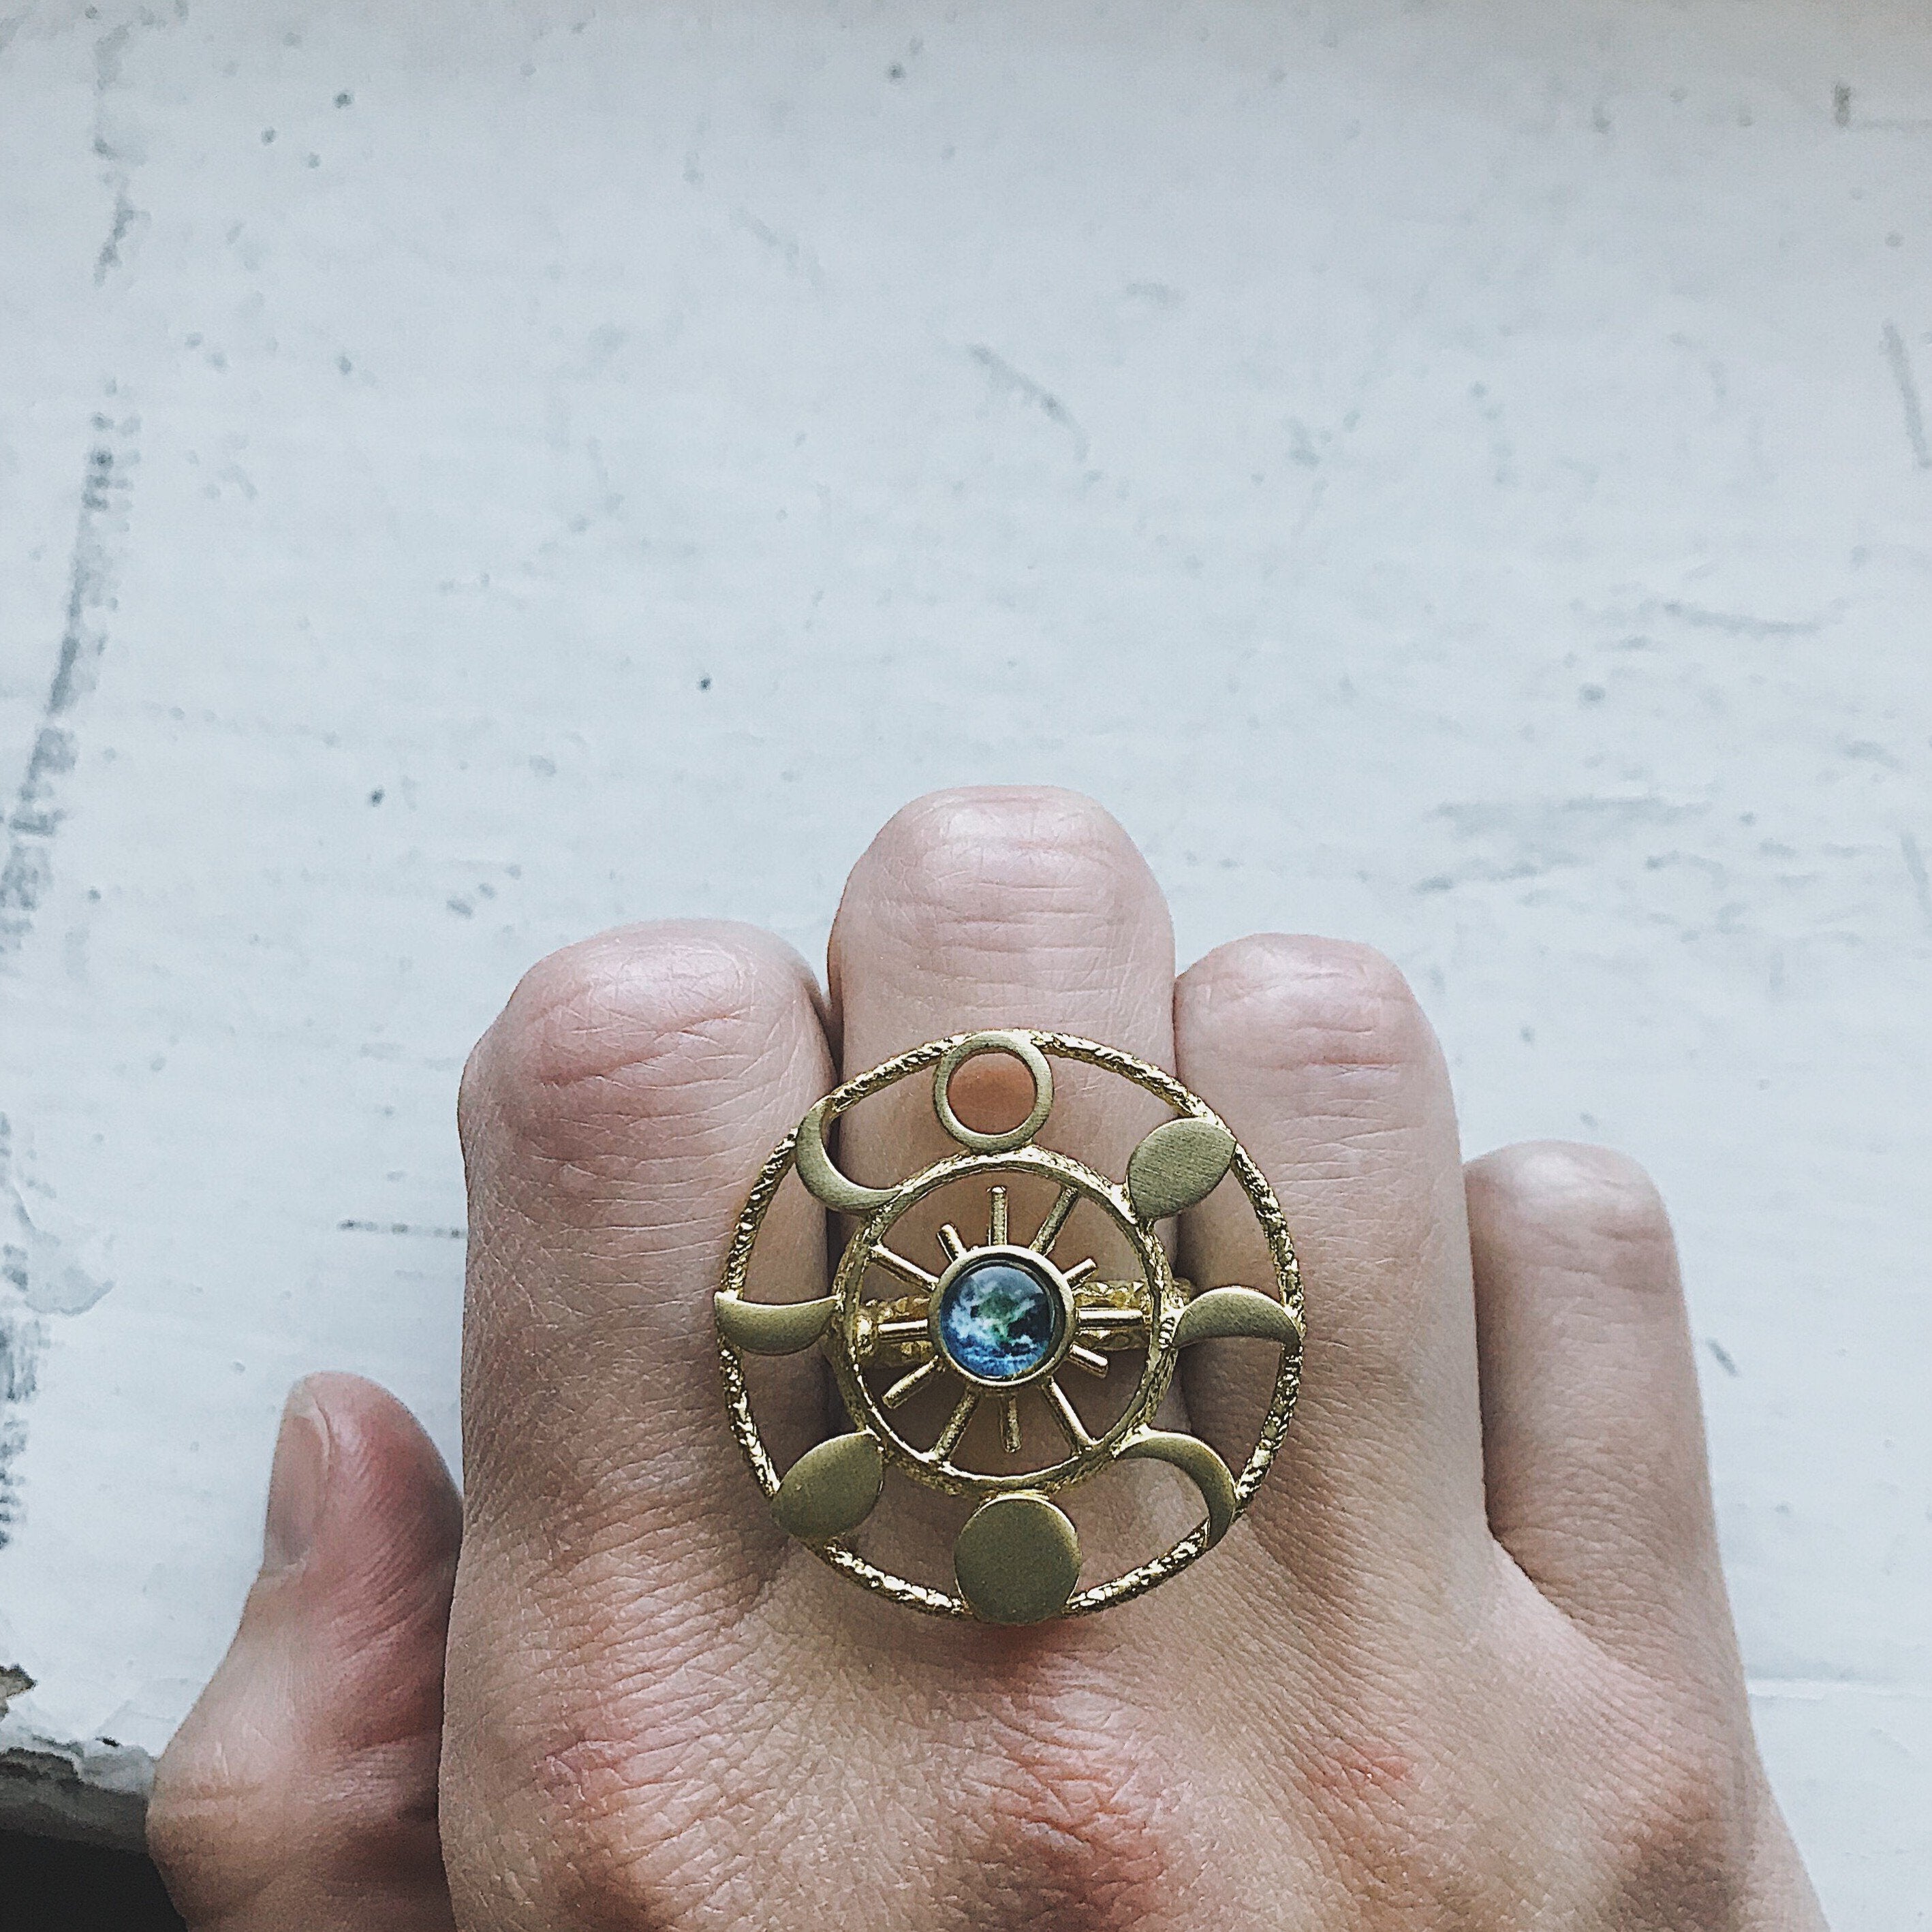 Moon Phase Cocktail Ring - Textured Brass with Glass Earth and 8 Lunar Phases in Halo - Jewelry & Watches - Bijou Her -  -  - 